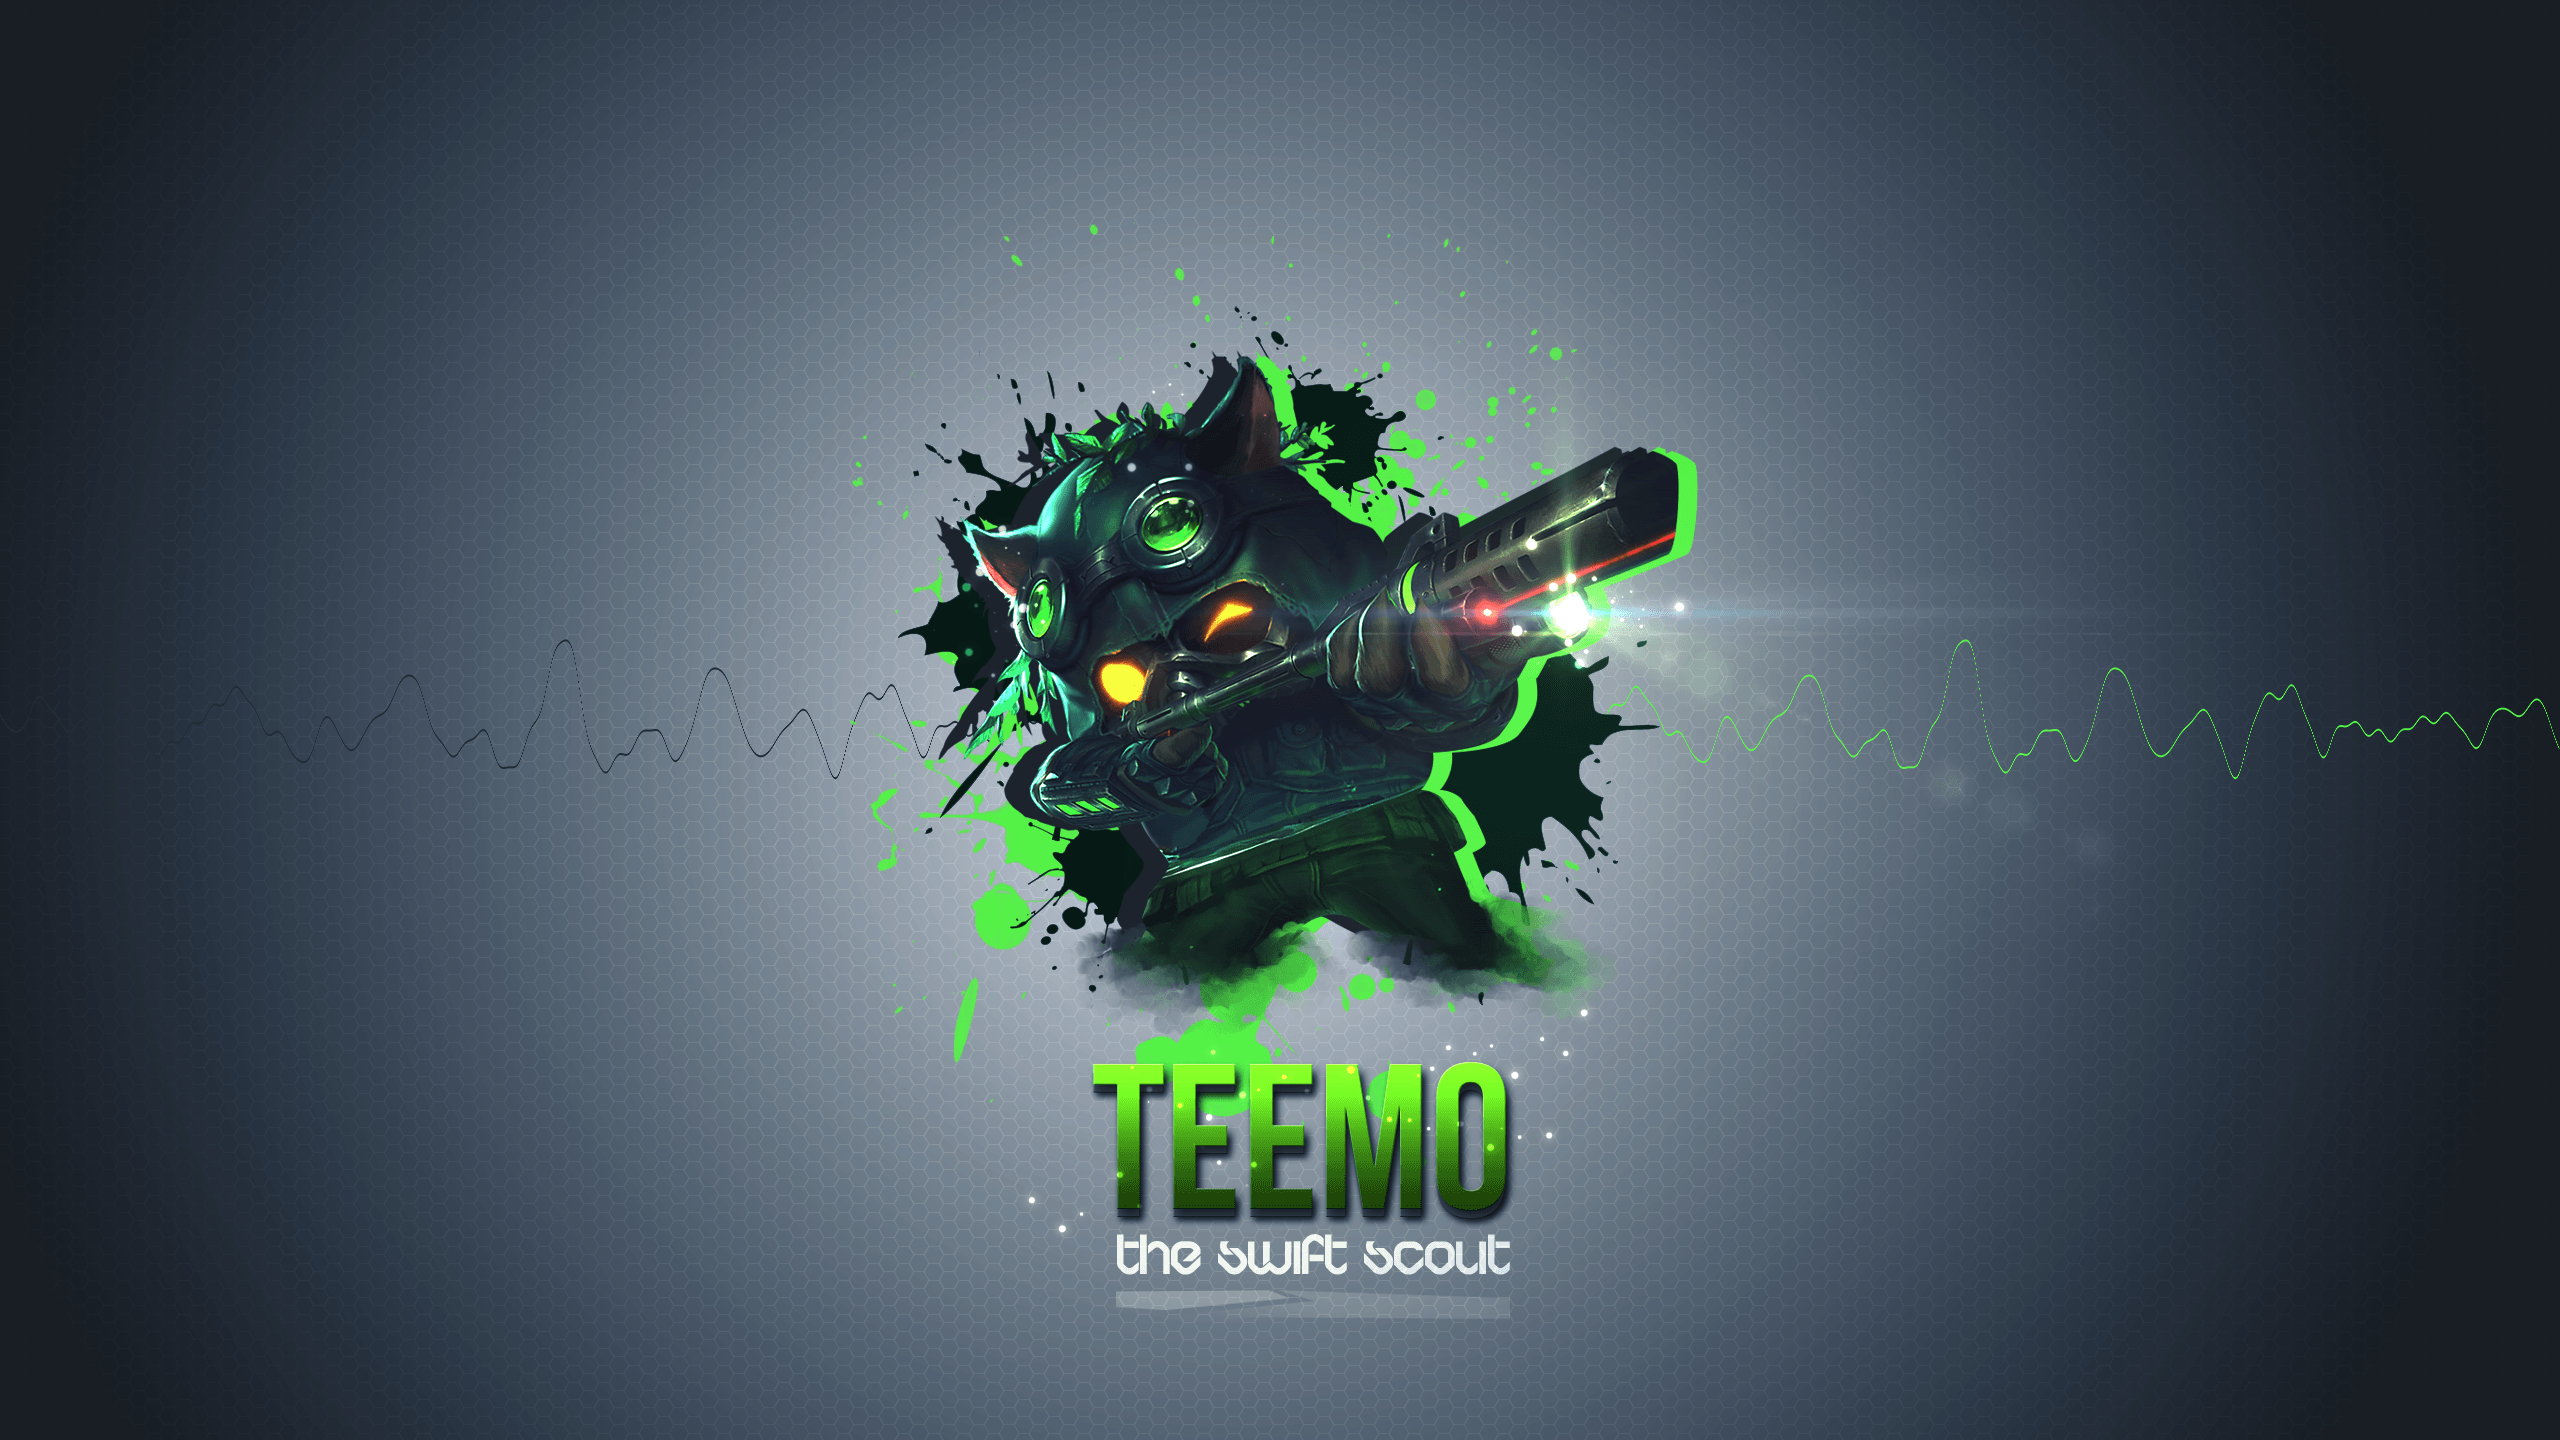 Omega Squad Teemo Wallpaper need your opinion please :3